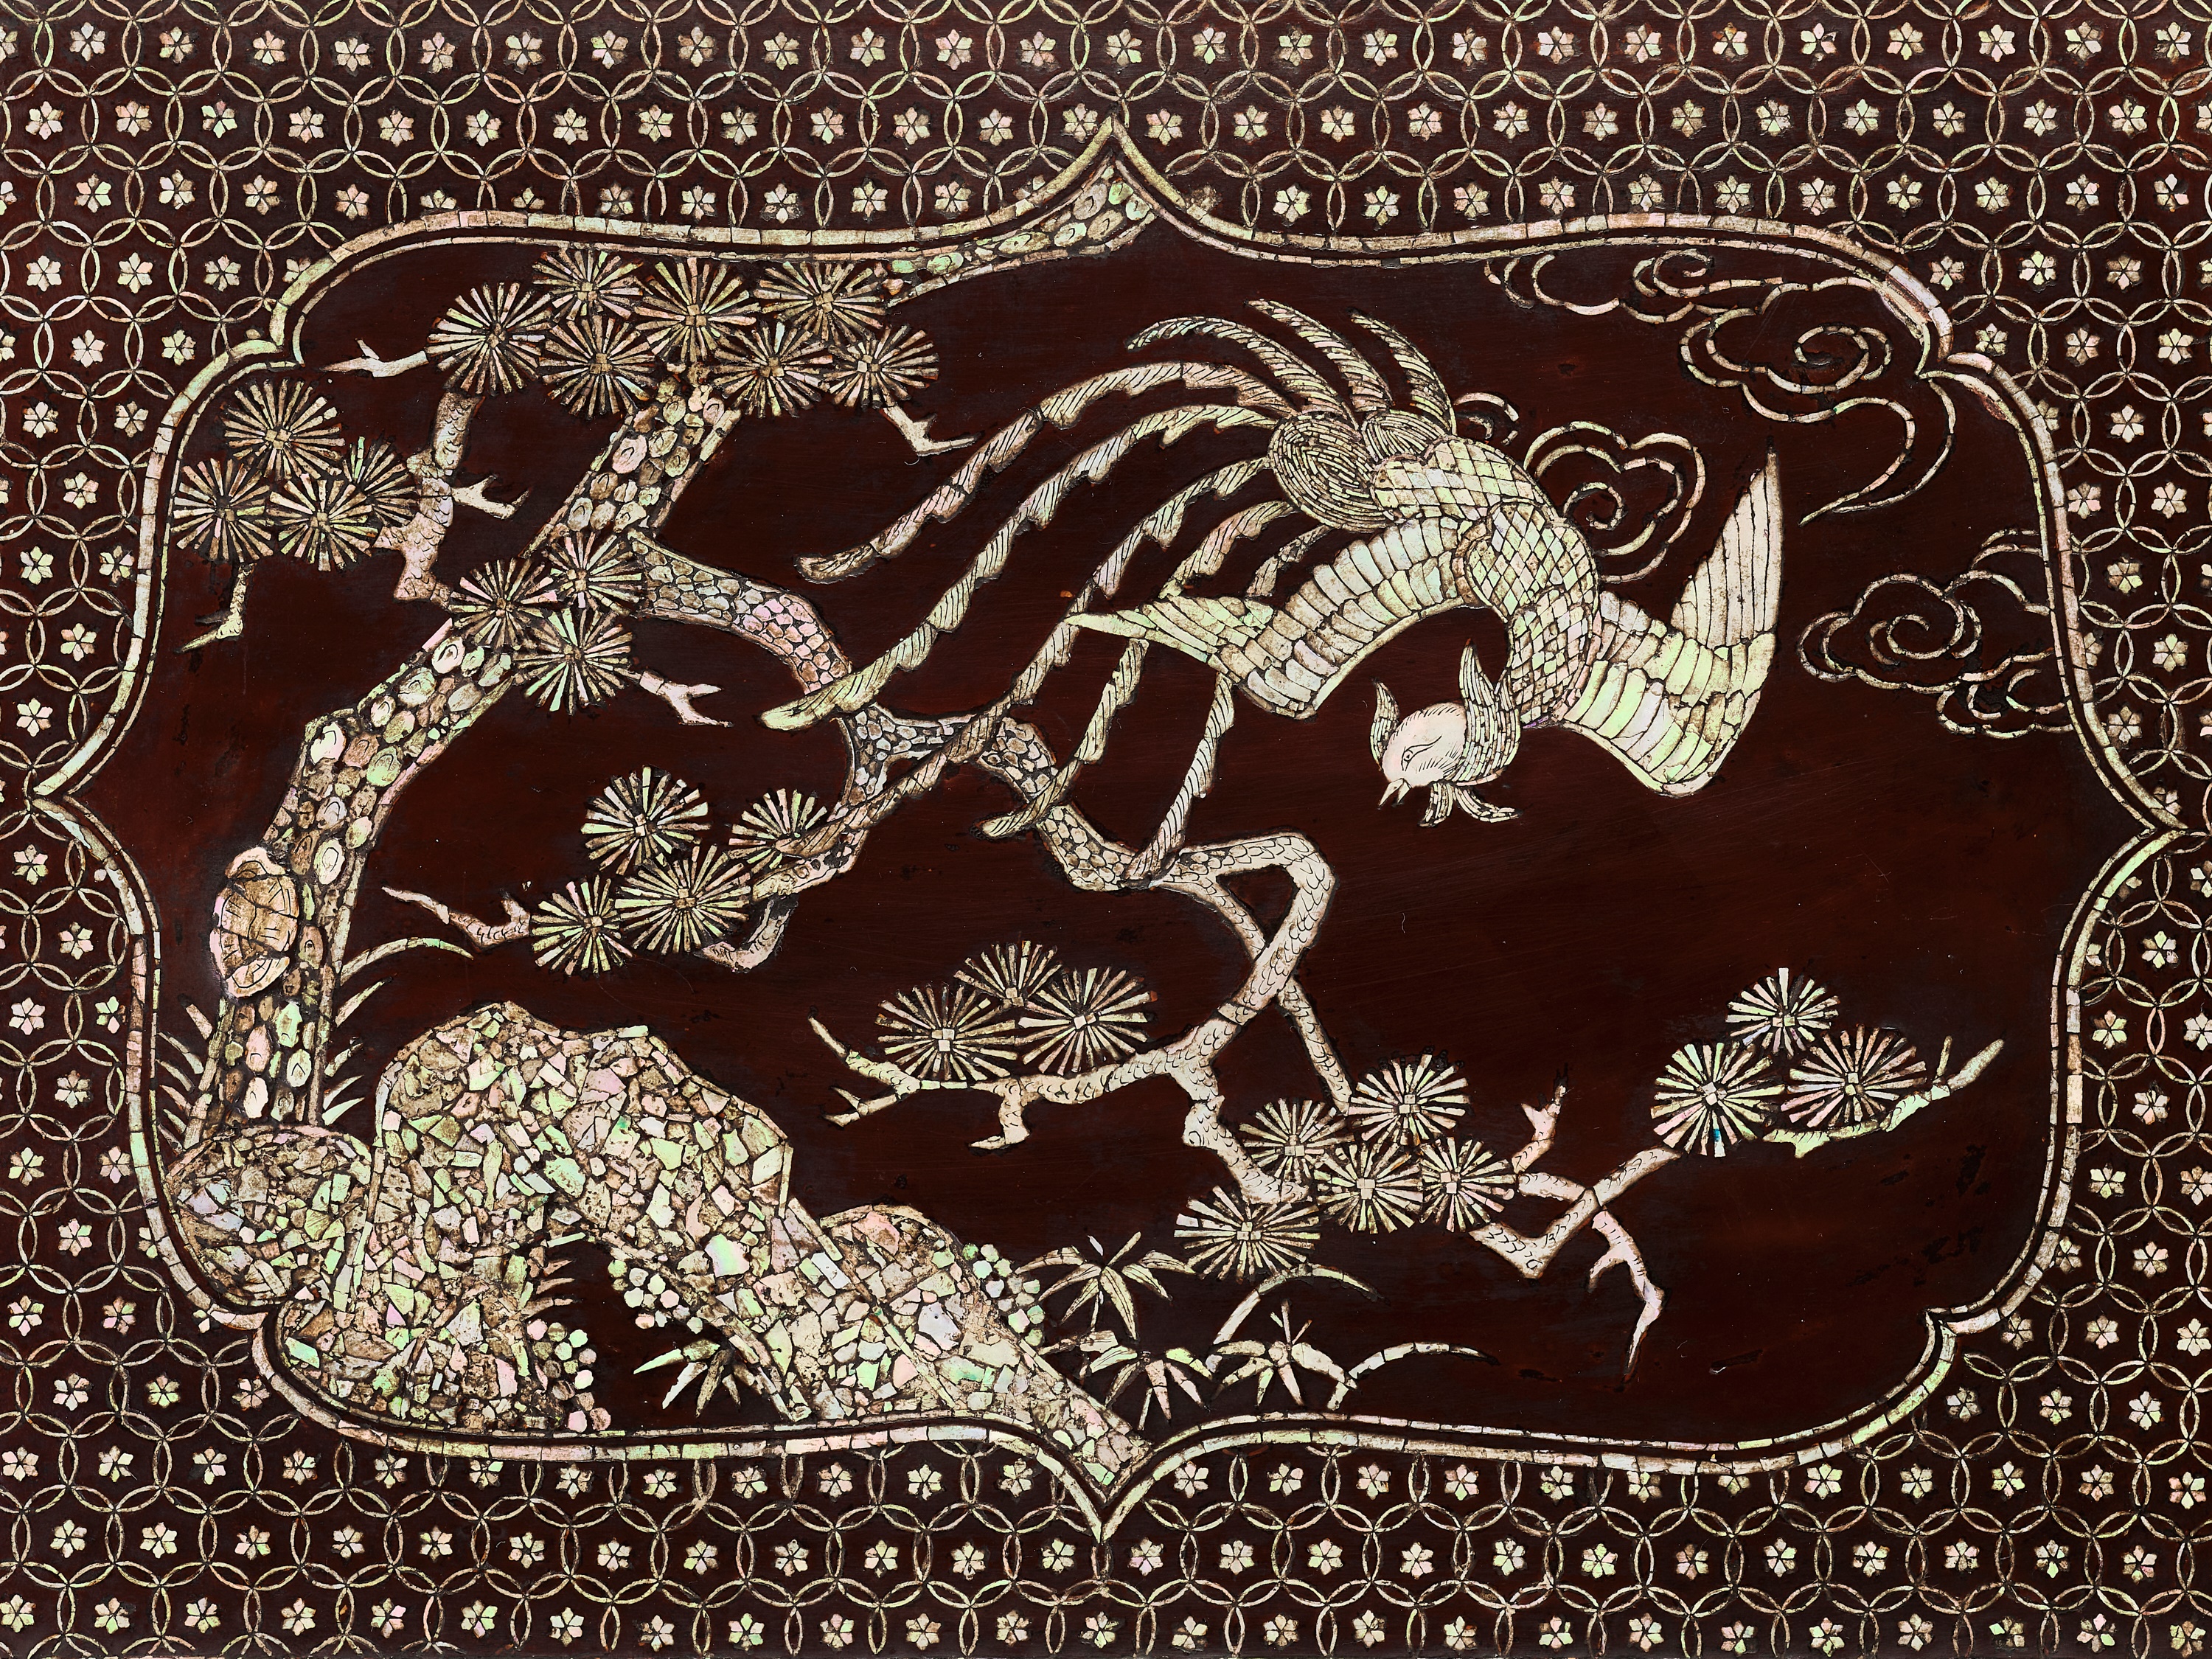 A RARE INLAID LACQUER 'PHOENIX' TRAY, MING DYNASTY - Image 6 of 8